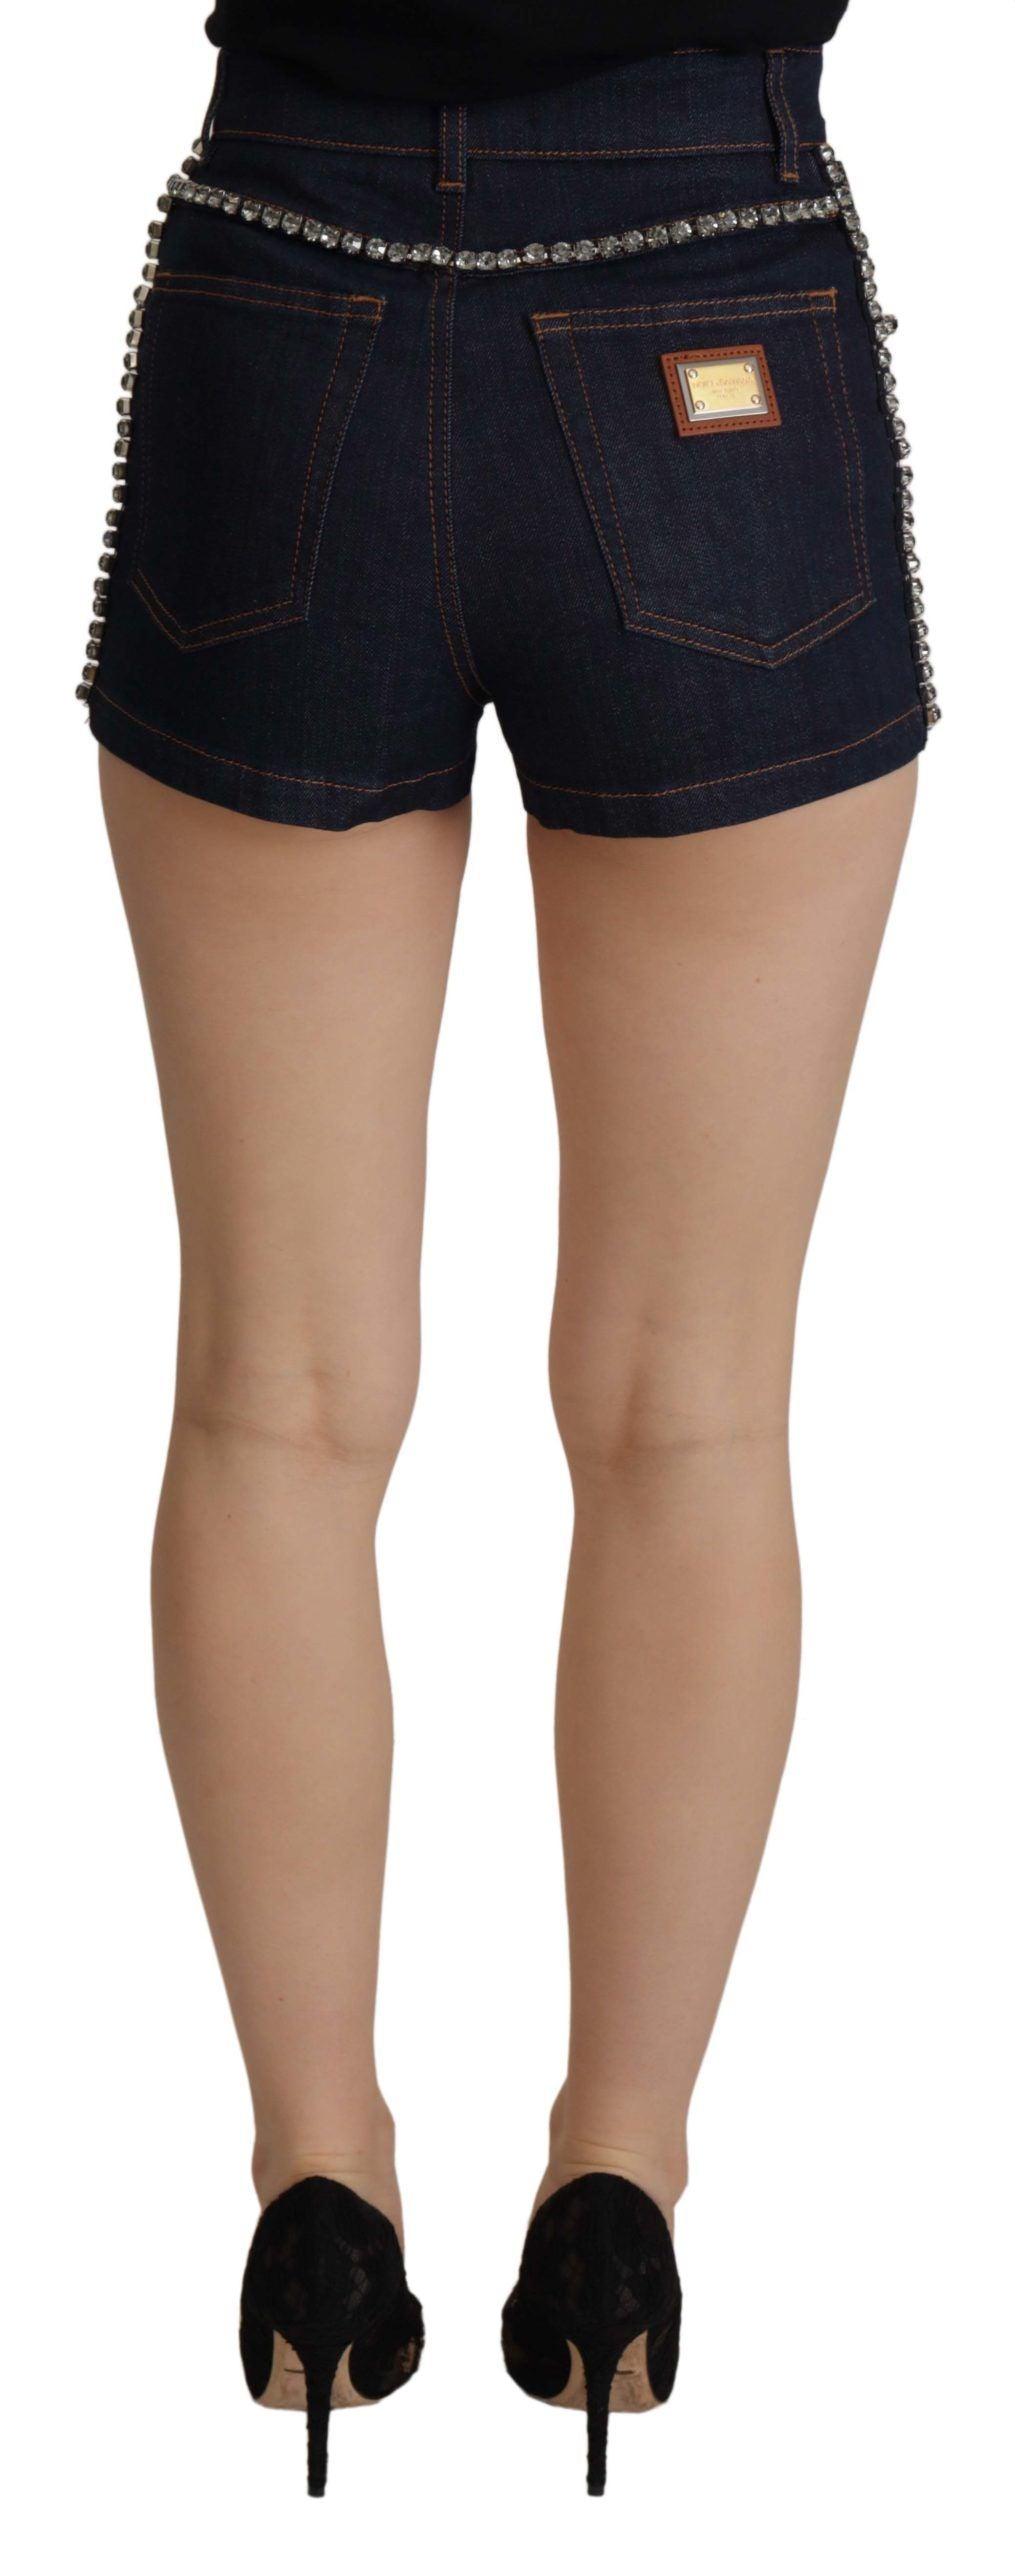 Dolce & Gabbana Blue Denim Stretch Crystal Hot Pants Shorts - Designed by Dolce & Gabbana Available to Buy at a Discounted Price on Moon Behind The Hill Online Designer Discount Store